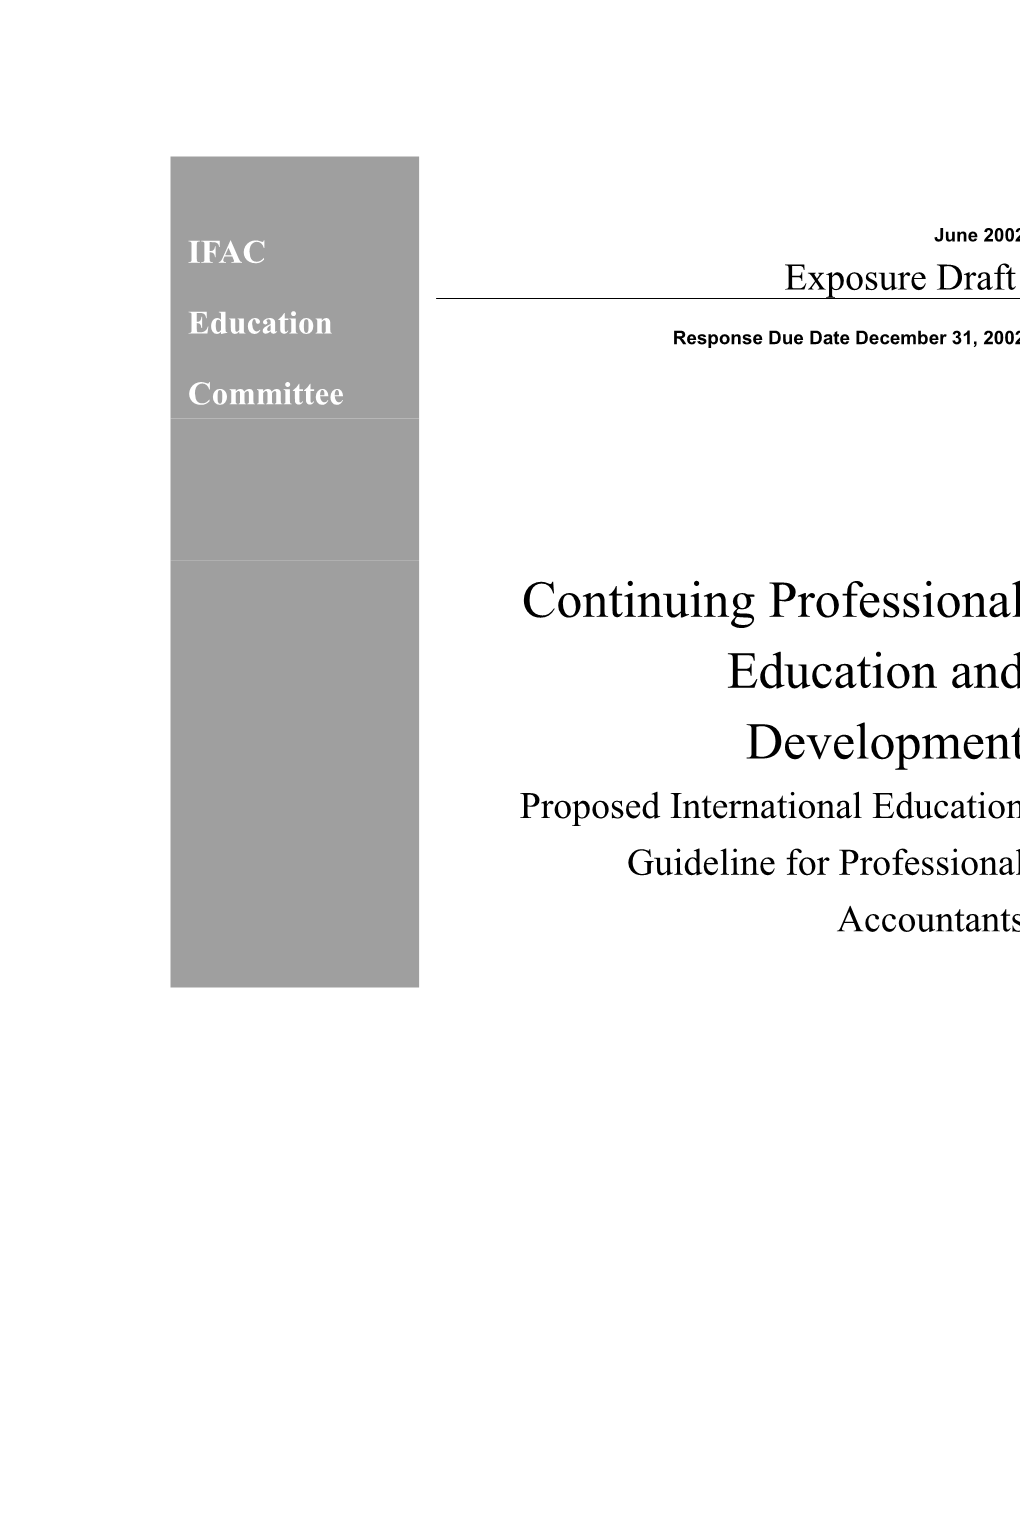 This Exposure Draft Was Approved for Publication in May 2002 by the Education Committee of IFAC